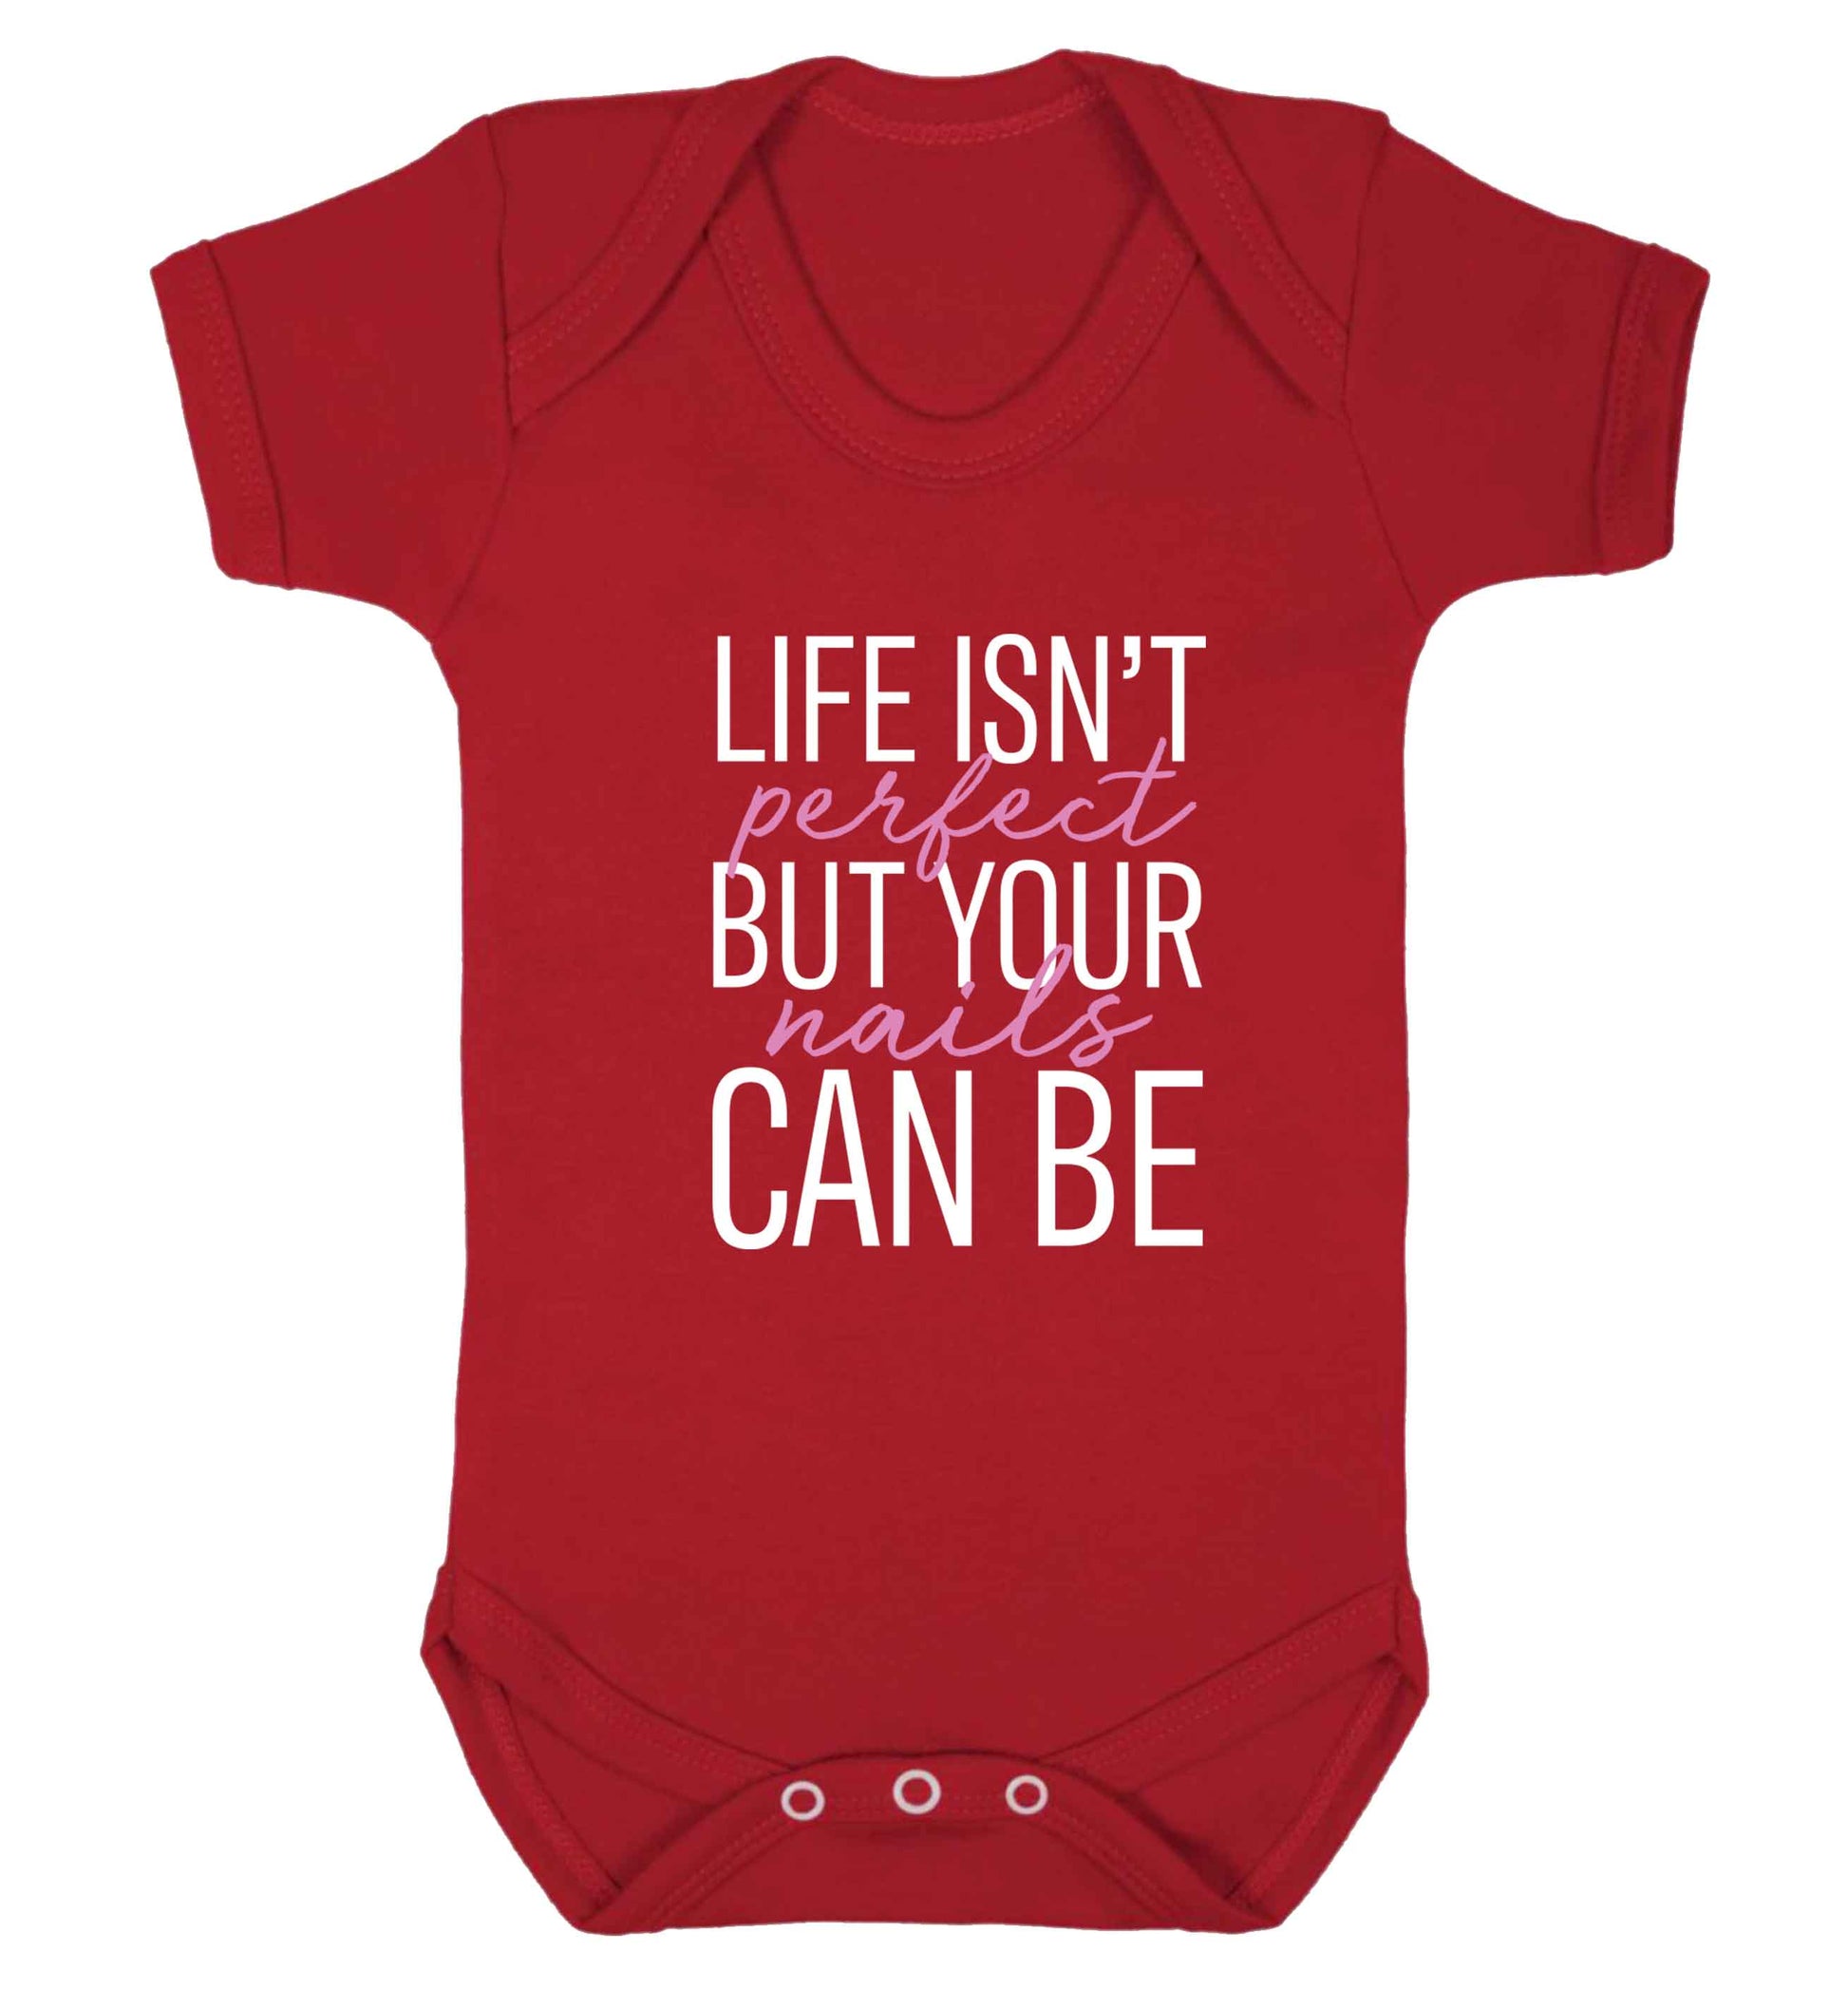 Life isn't perfect but your nails can be baby vest red 18-24 months